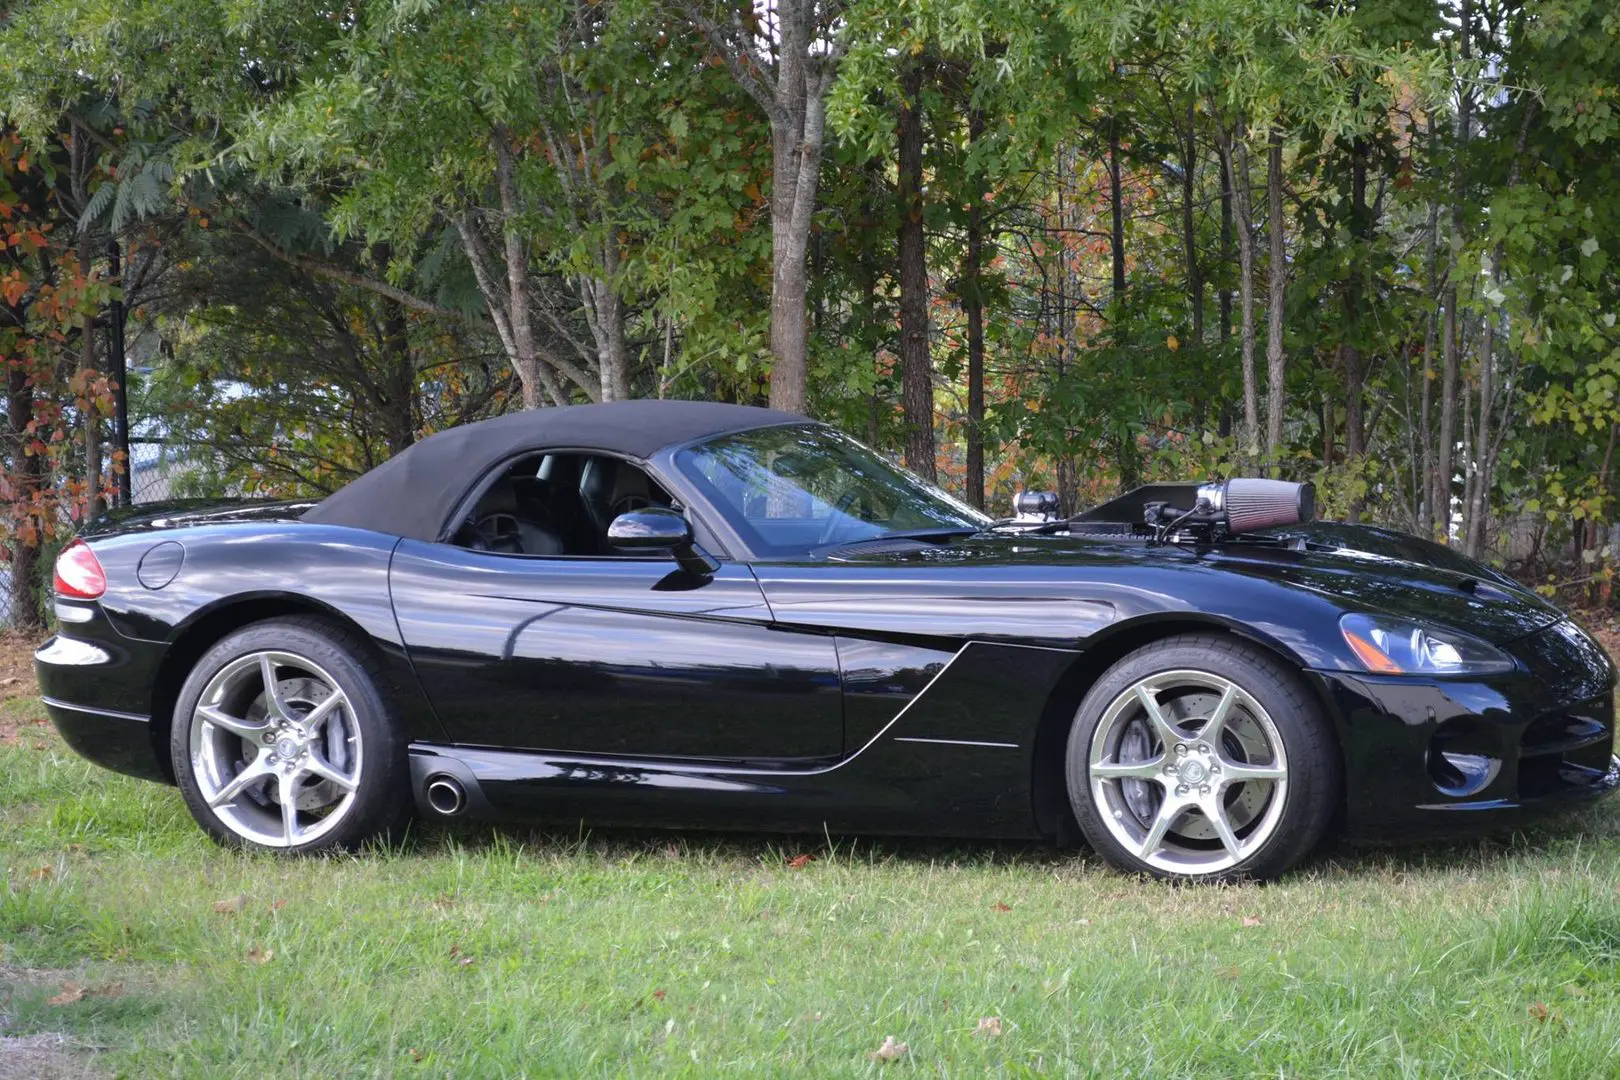 A black sports car parked in the grass.